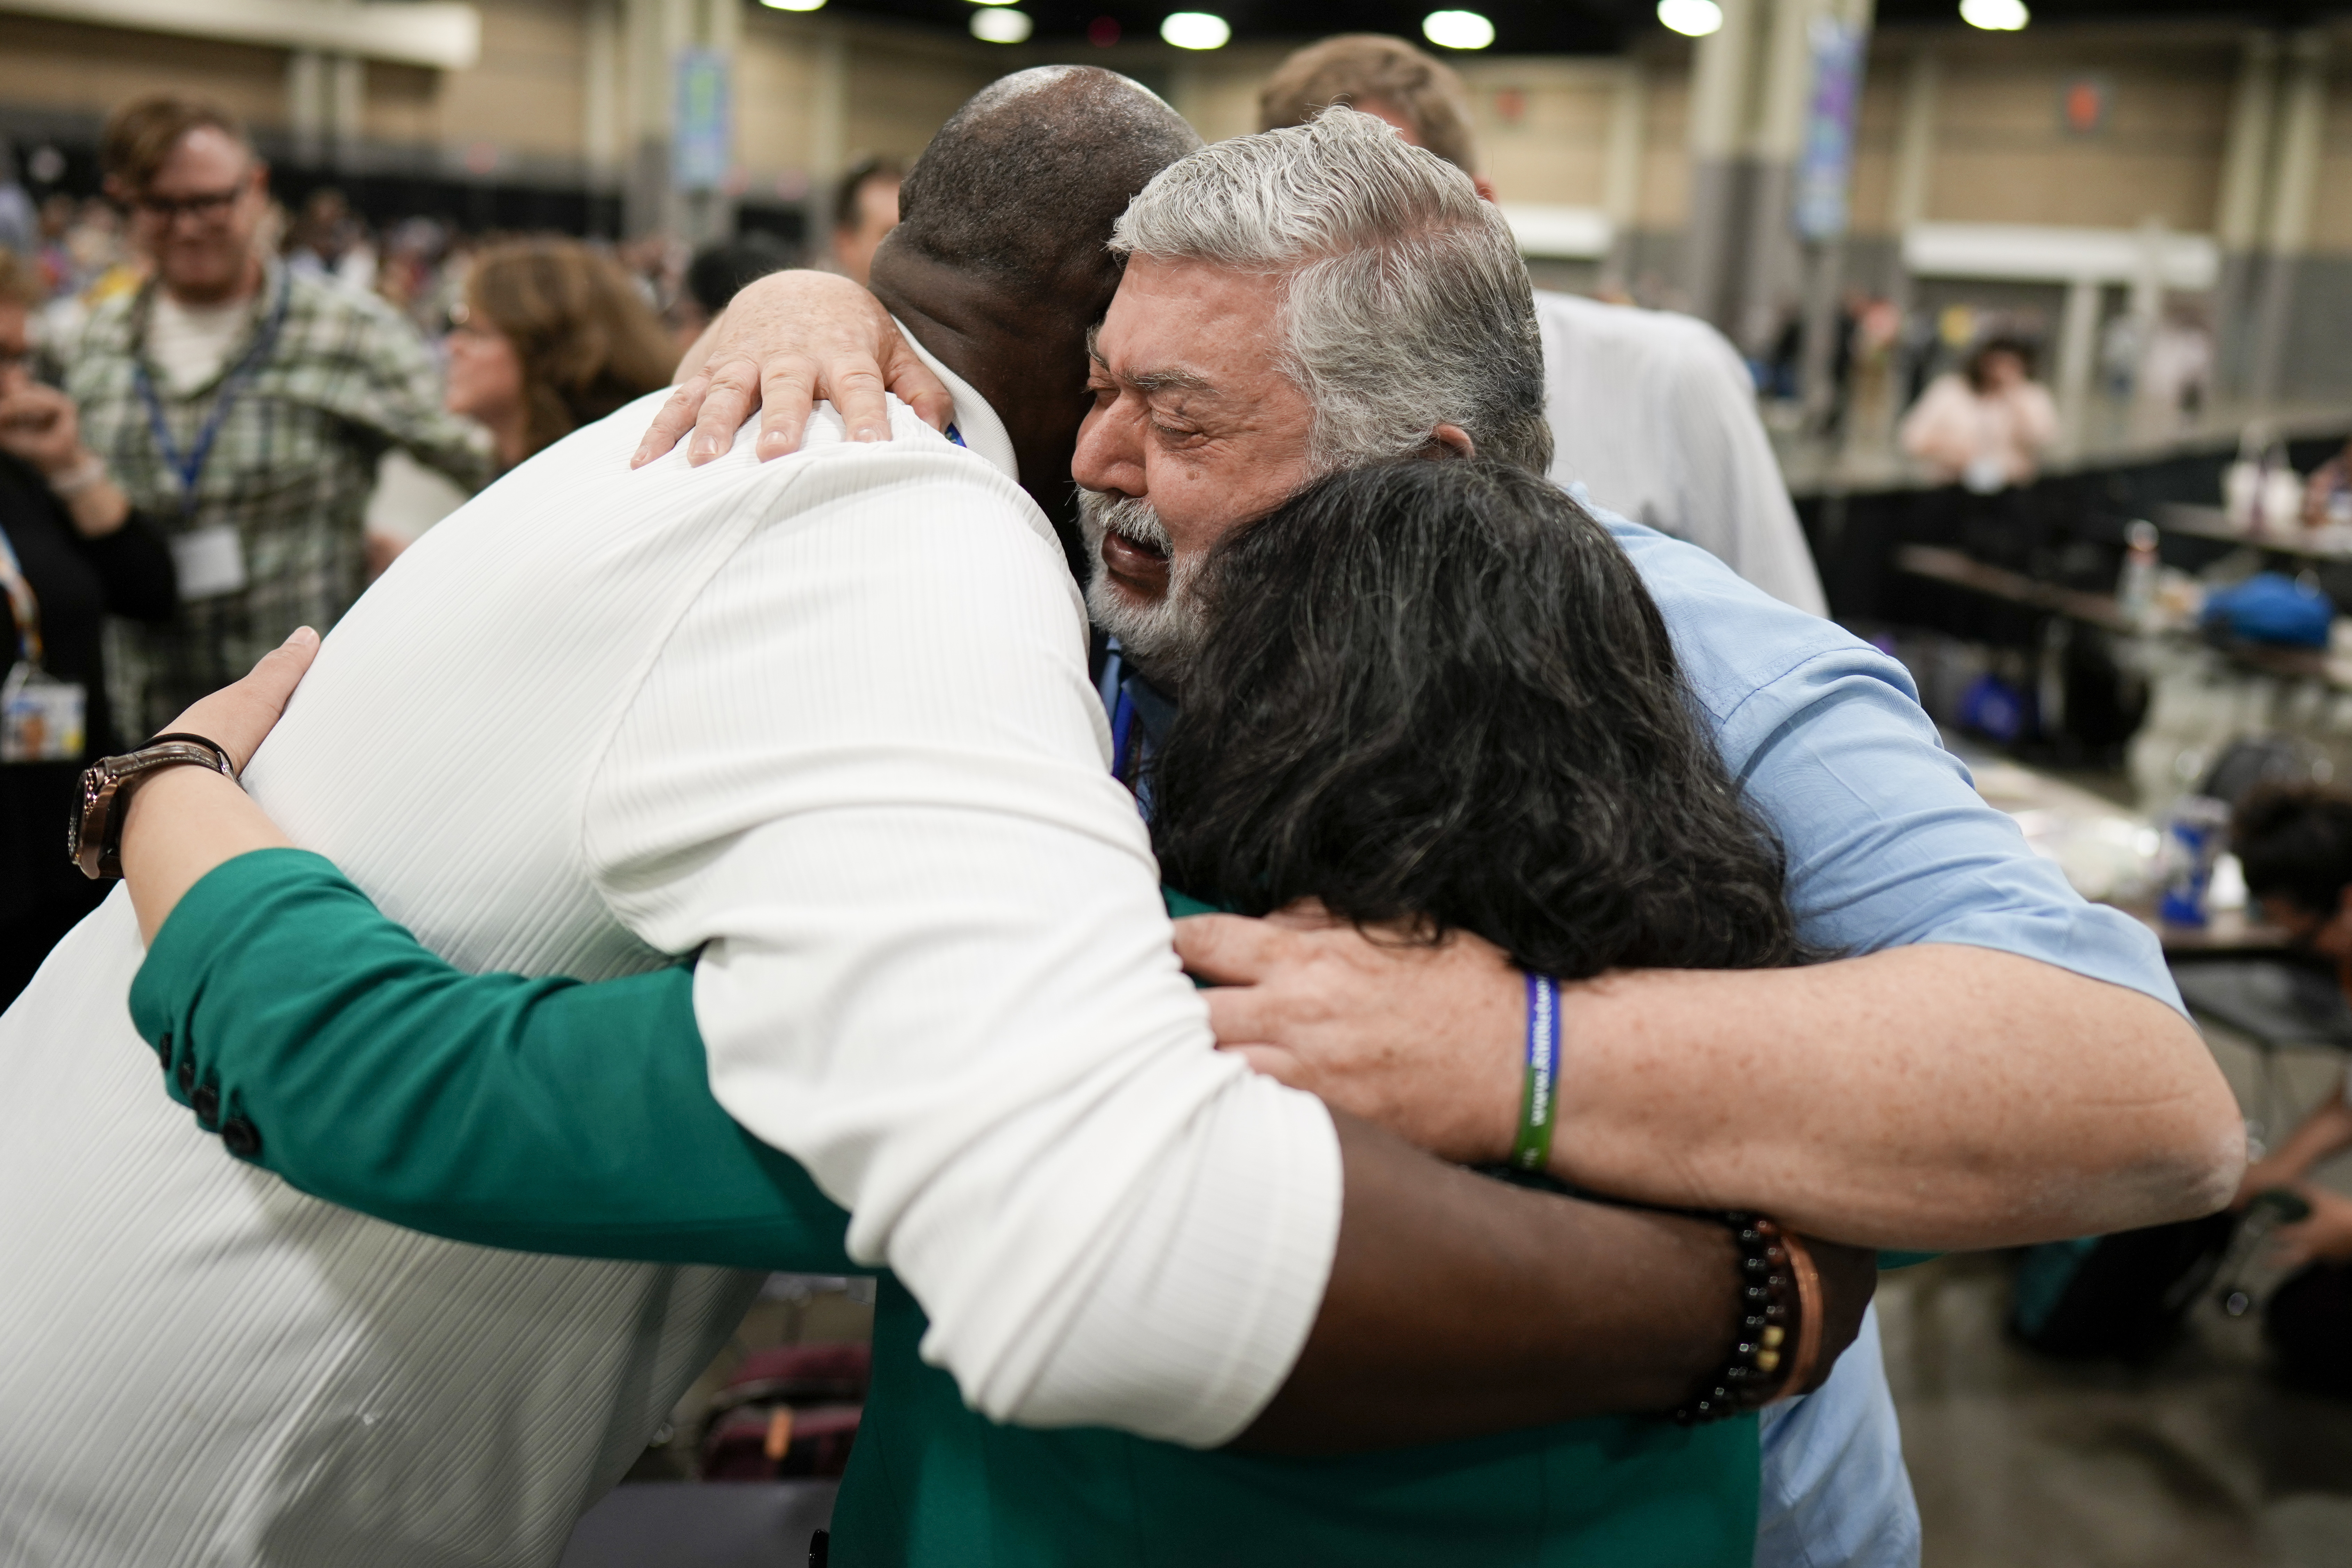 David Meredith (middle) shared a hug after after a vote at the United Methodist Church...